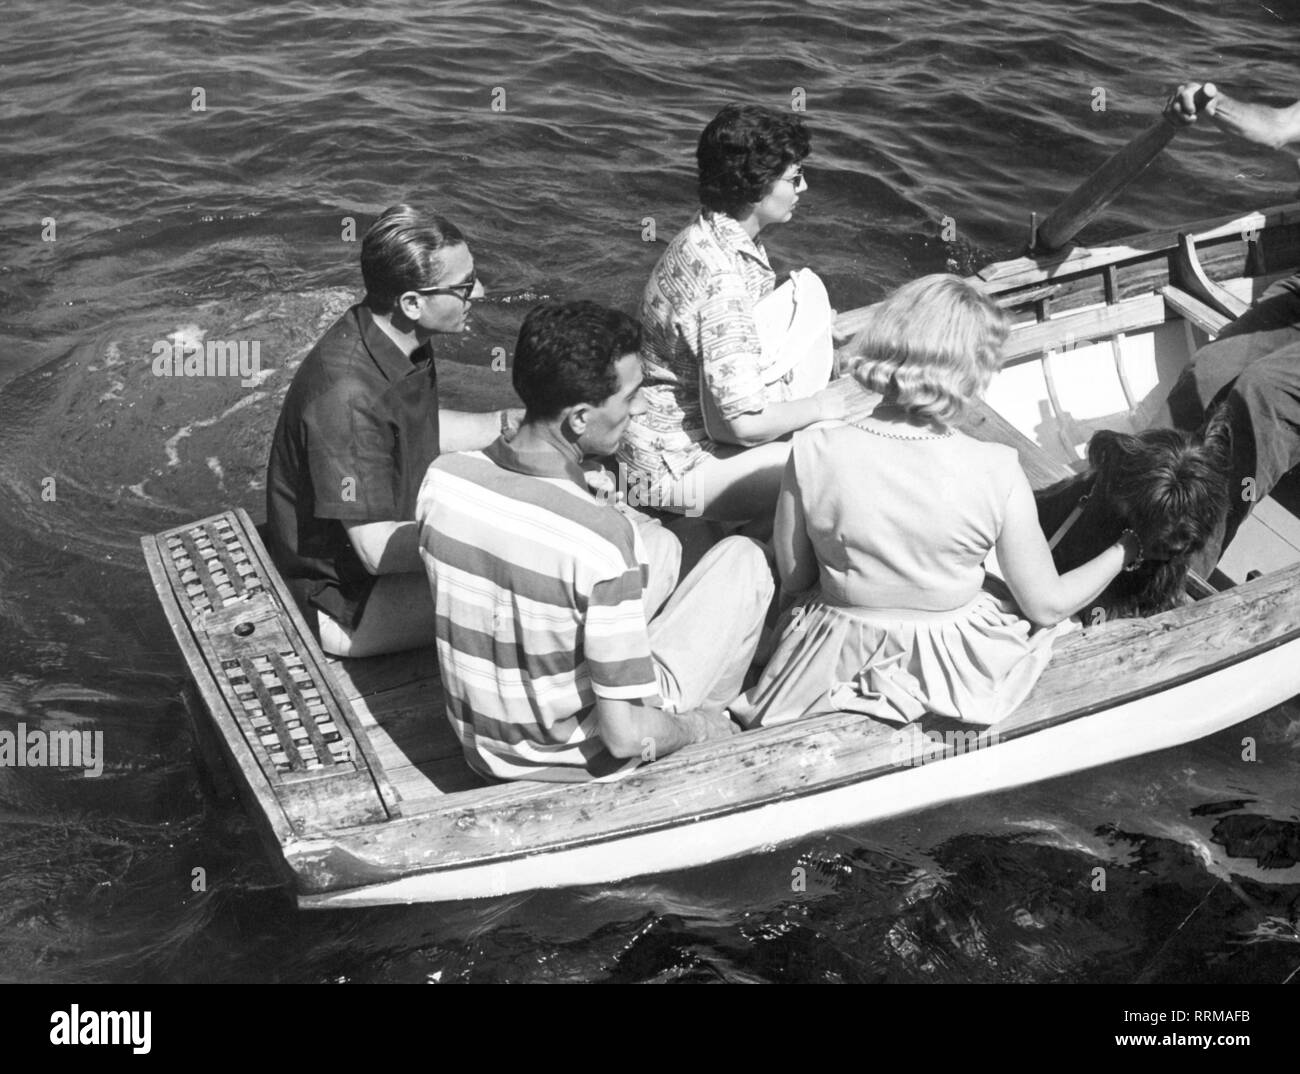 Mohammad Reza Pahlavi, 26.10.1919 - 27.7.1980, Shah of the Iran 17.9.1941 - 31.3.1979, half length, with wife Soraya in a rowboat, Capri, 19.7.1957, Additional-Rights-Clearance-Info-Not-Available Stock Photo